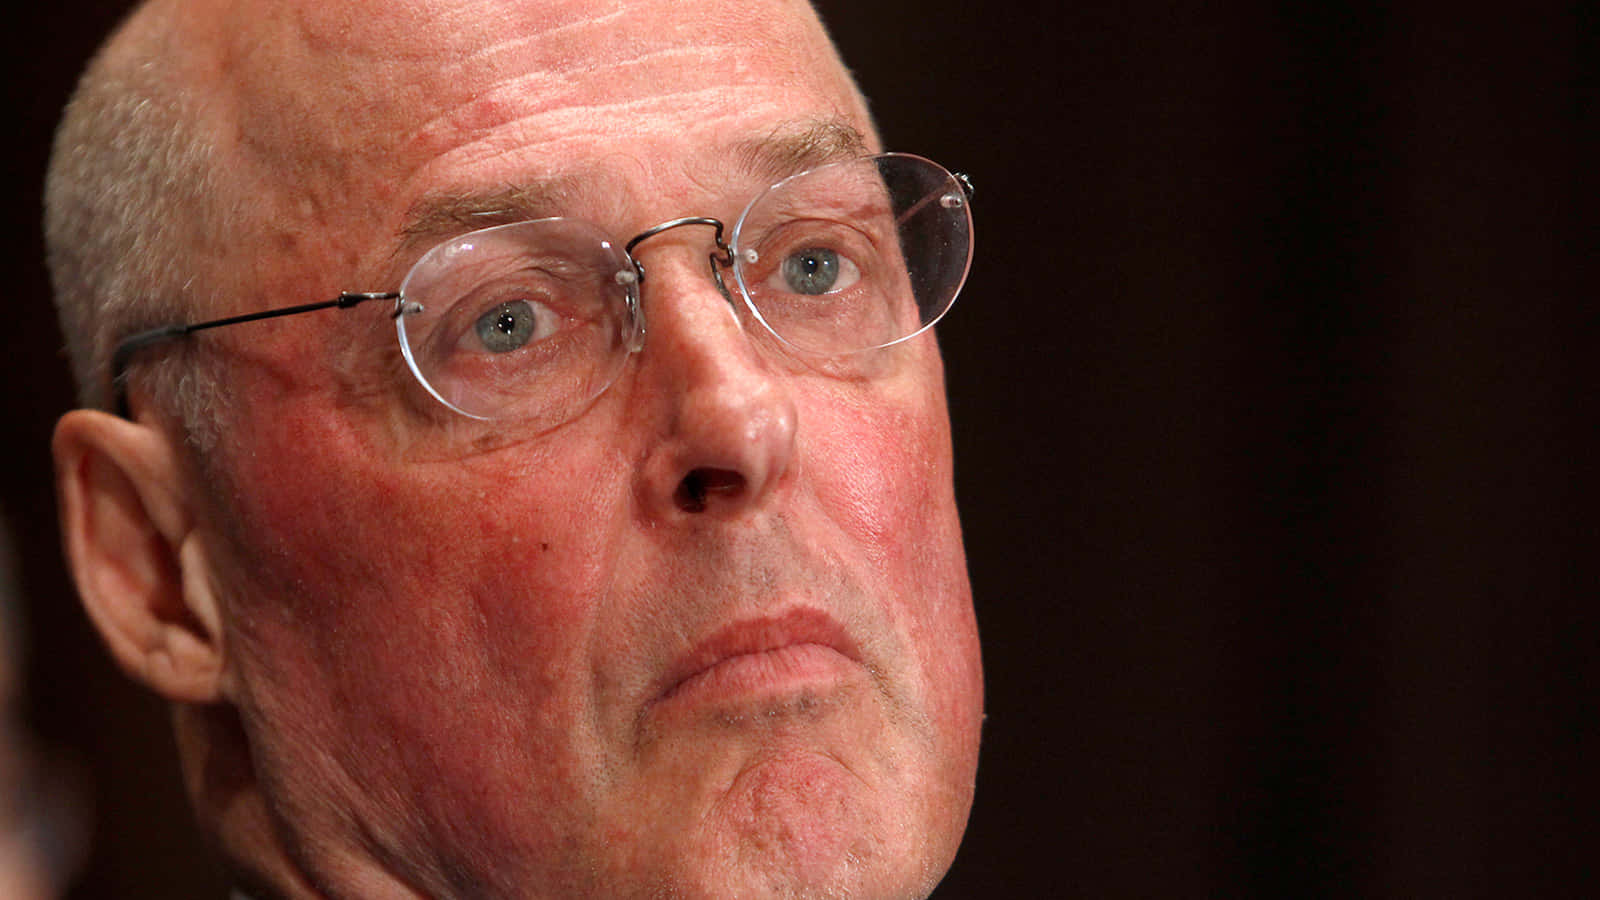 Henry Paulson with a serious expression Wallpaper